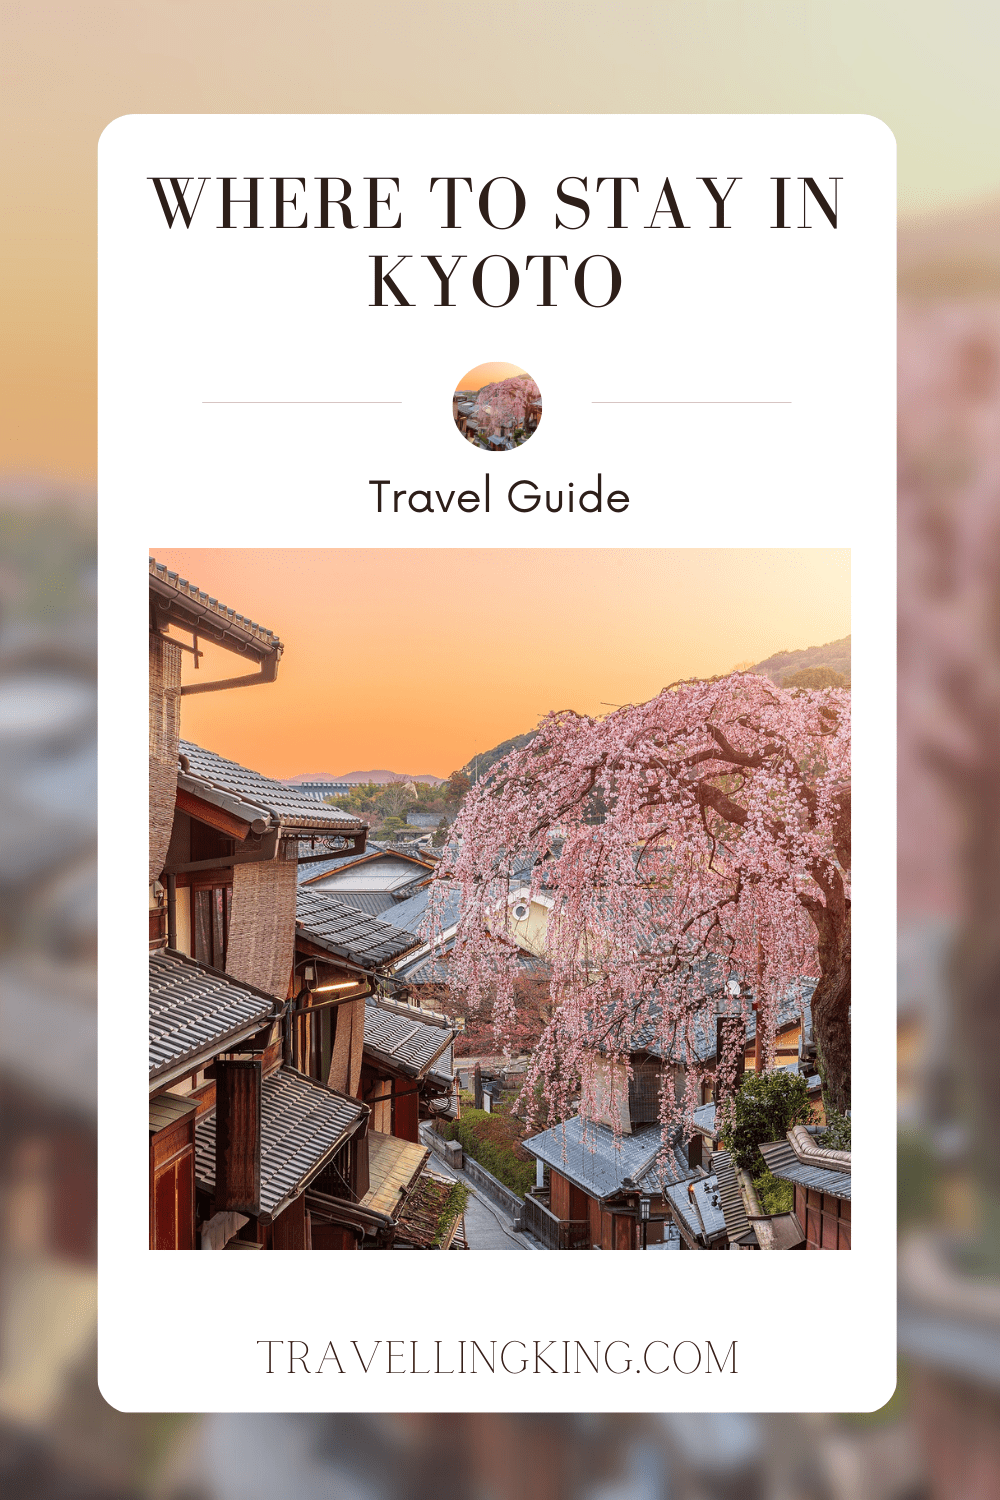 Where to stay in Kyoto